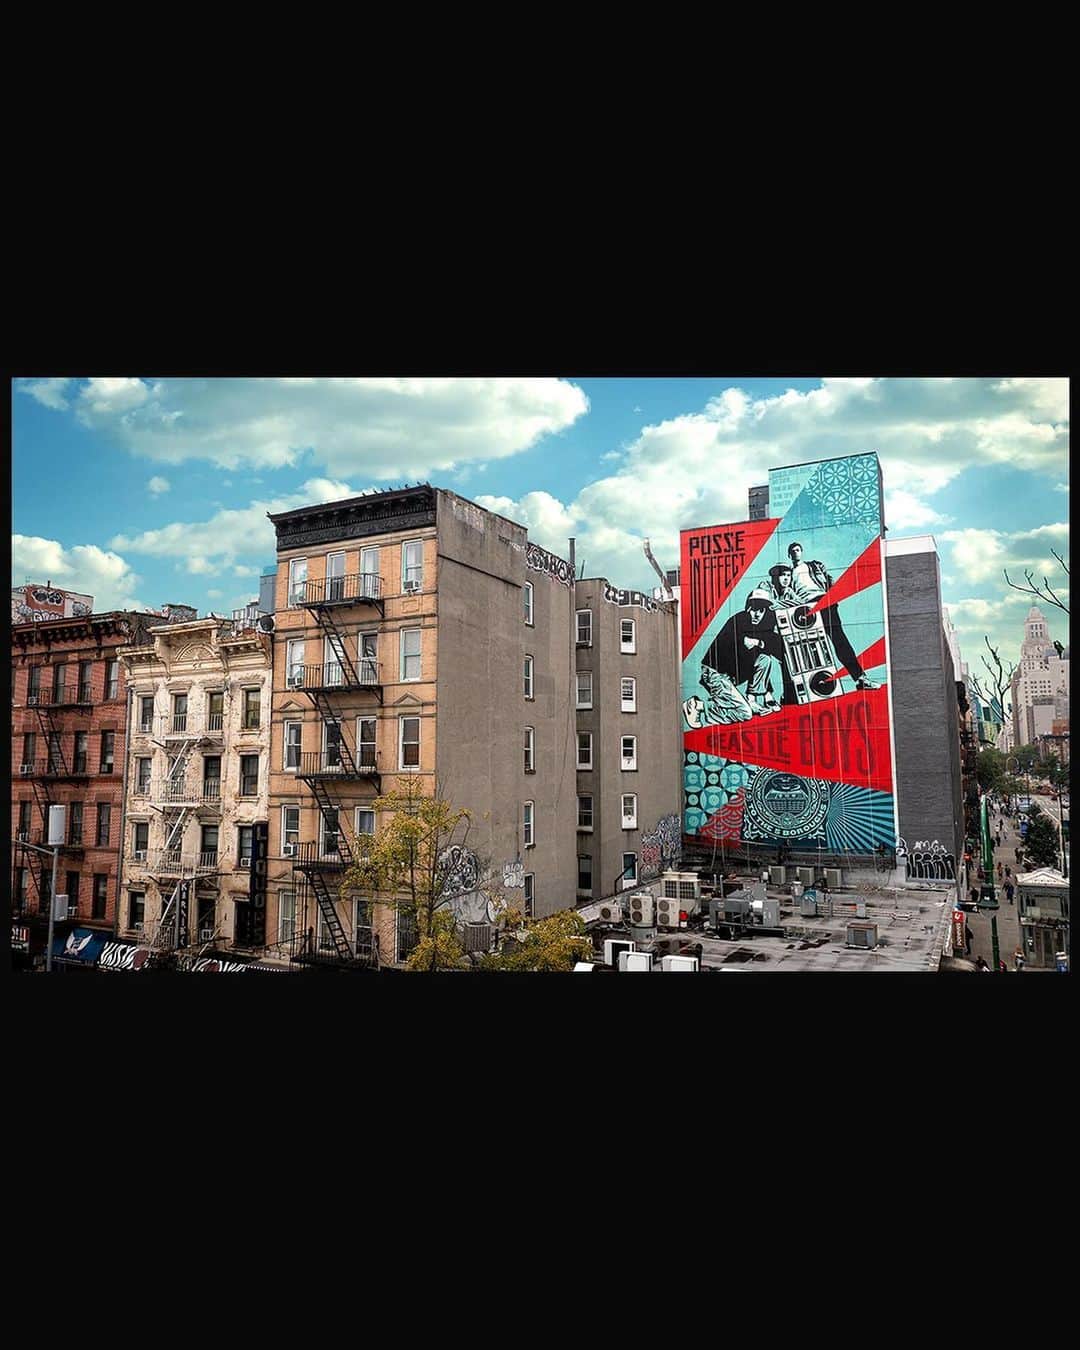 Shepard Faireyのインスタグラム：「The crew and I just completed an 8 story @beastieboys mural as part of the NYC Hip Hop 50 celebration at the corner of 14th and Ave. A. After my best childhood friend started at NYU in 1990, I began putting up street art in the Village on a regular basis so this location is significant for me. This is also an area where the Beastie Boys hung out and they recorded their first E.P. down the street at 171 A… where the Bad Brains also recorded their ROIR album. The mural is based on a Licensed to Ill era Beasties photo by @glenefriedman, who also shot their Check Your Head cover. When the Beastie Boys’ album Licensed to Ill came out, I was exhilarated by their metamorphosis into a hip-hop group from a punk band because I had mainly been listening to punk. Even though I liked RUN-DMC and the hip-hop from Beat Street and Breakin’, I felt awkward being into hip-hop as a white kid. Licensed to Ill was instantly infectious and a thrilling sonic encapsulation of bratty teen rebellion. It was (and is) a great hip-hop album. The Beasties blew the doors open for me to embrace other hip-hop and they kept evolving musically and spiritually while redefining what was possible within the genre. I’m forever grateful to the Beasties for their contribution to culture and the soundtrack of my life… and for their embrace of, and contribution to, this mural project!  The work on the mural was hot and grueling so thanks to my crew of Rob Zagula and Jon Furlong (who also shot the pics!) as well as Amanda, Oscar, and Sher who were local help from the @lisaprojectnyc crew. It takes long hours and intense physical effort to paint at this scale and I’m incredibly grateful for the hard work from everyone. This project also would not have happened without the intense efforts of Wayne and Rey from @lisaprojectnyc and the generous support of @hardrockhotelnyc.  –Shepard  Photos: @jonathanfurlong」